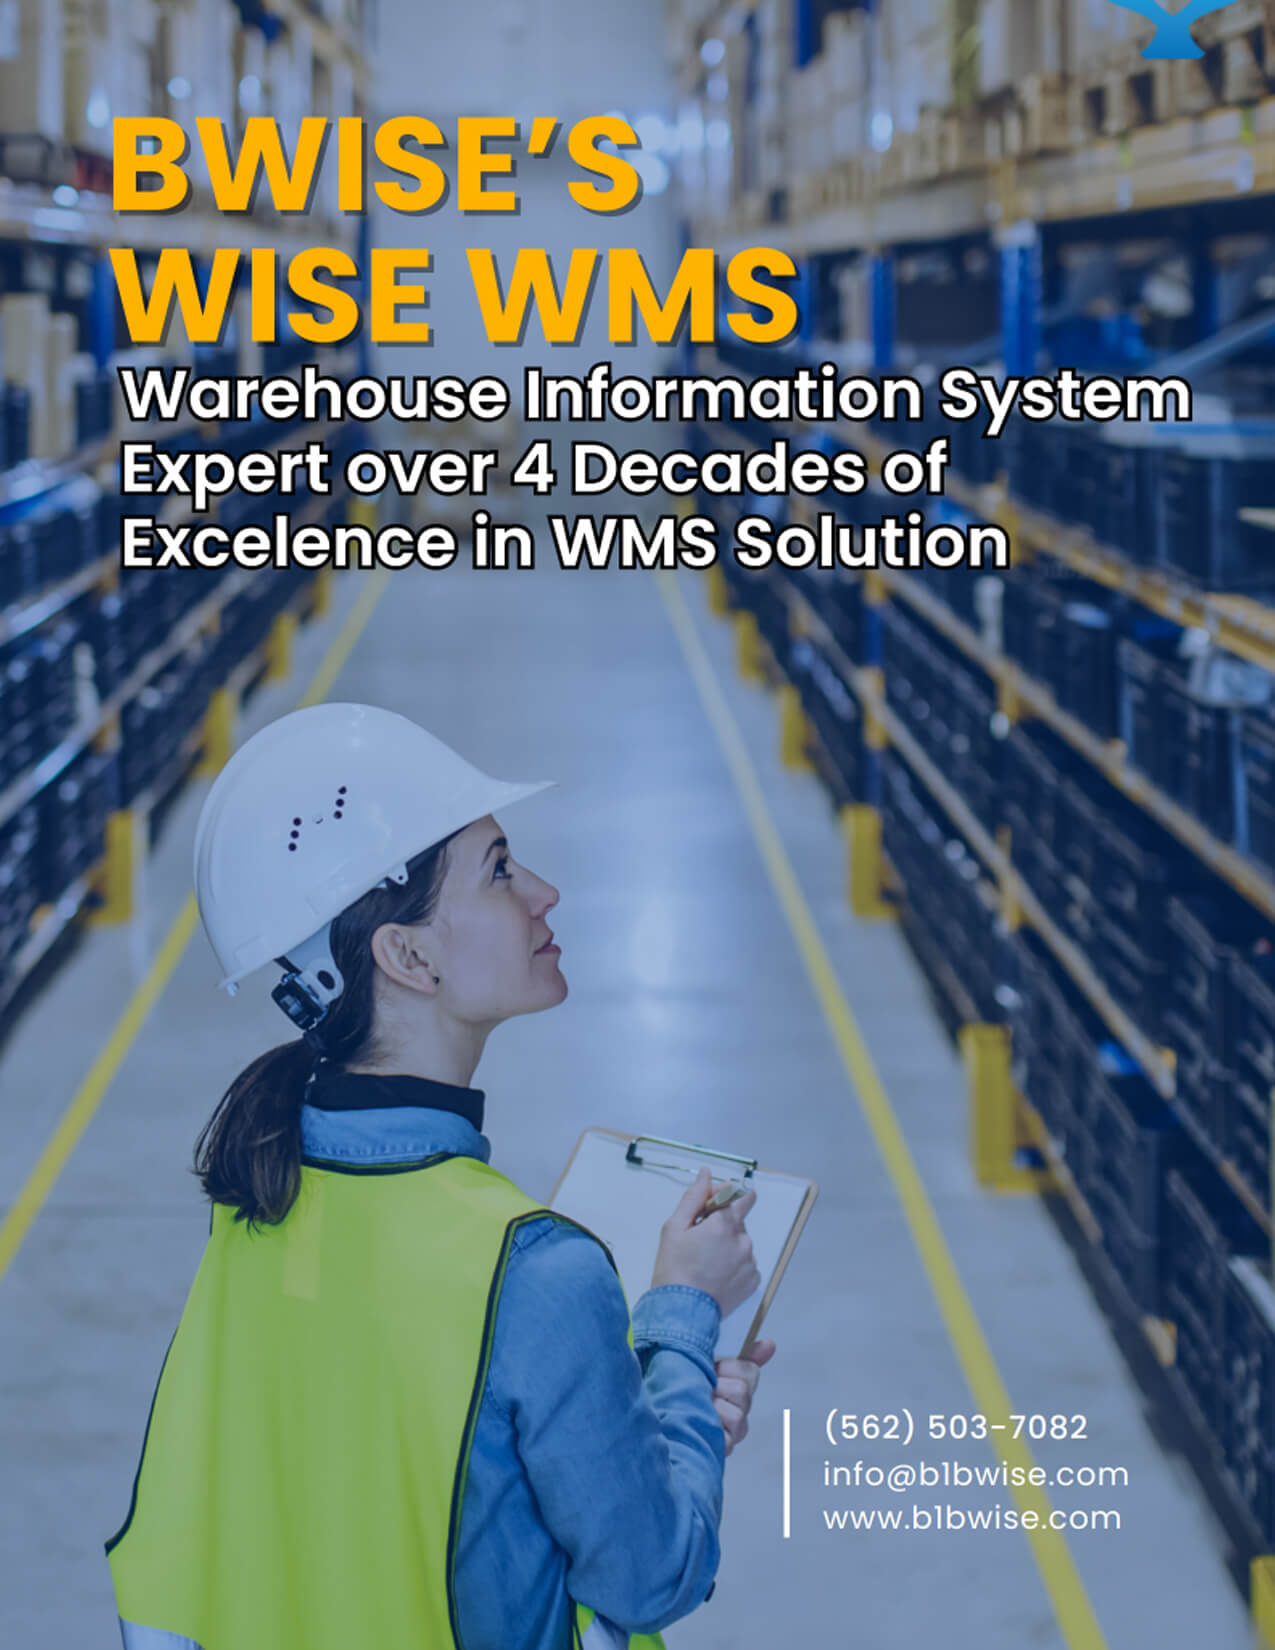 BWISE Full ERP Solution for Warehouse Management and Distribution